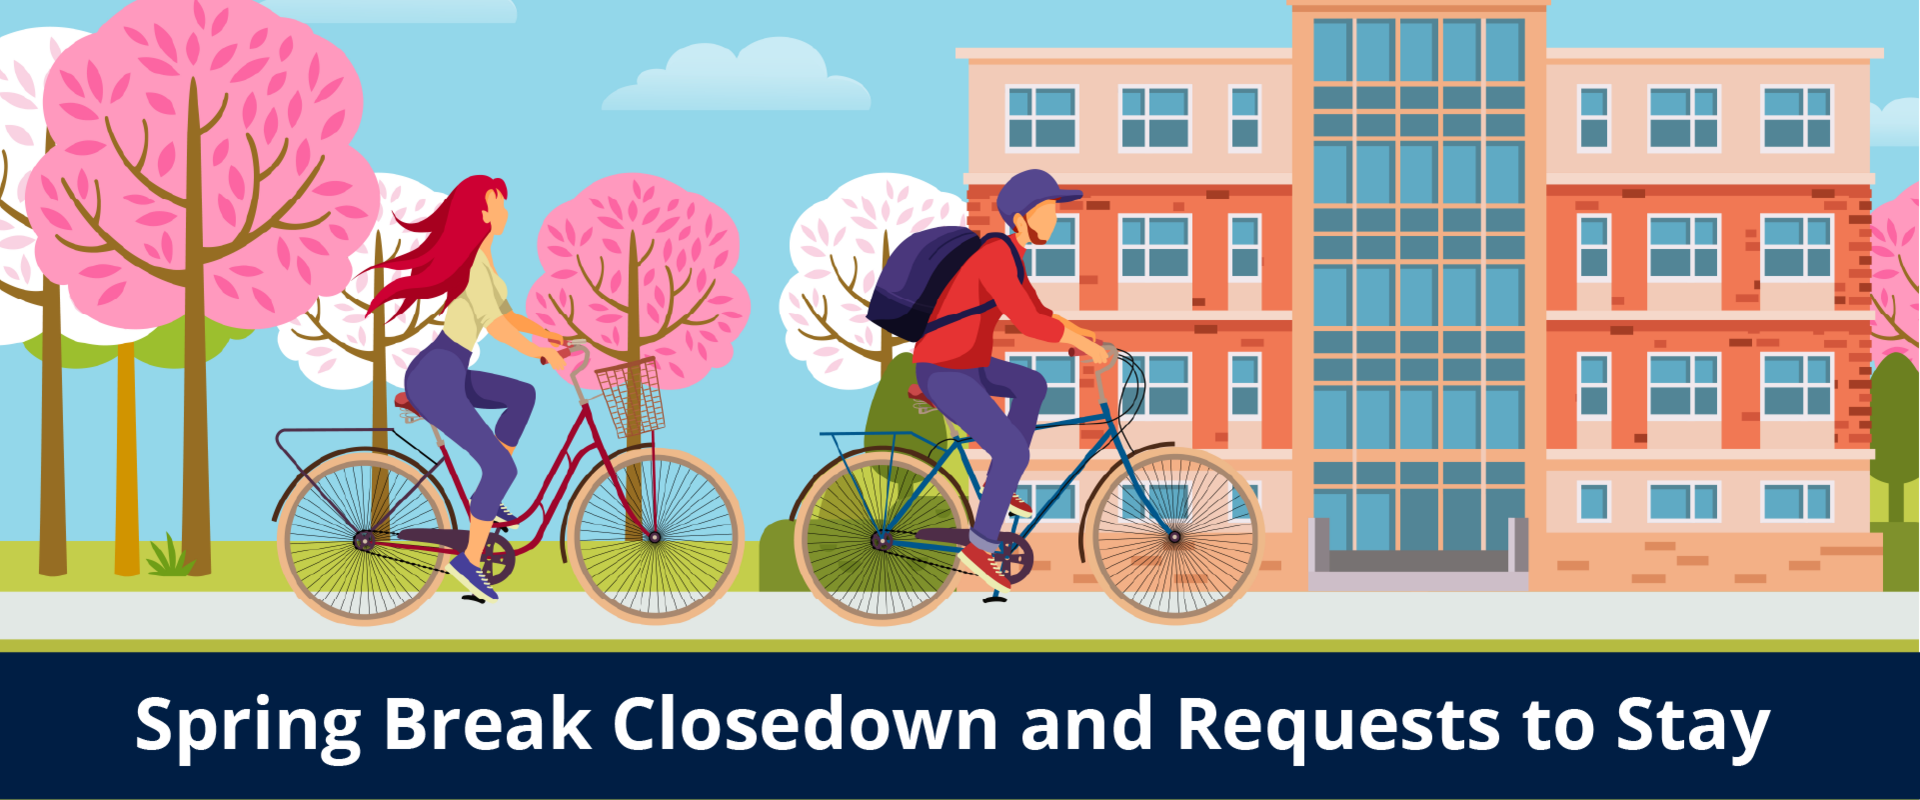 "Spring Break Closedown and Requests to Stay" headline on an illustration of students riding bikes in front of a residence hall